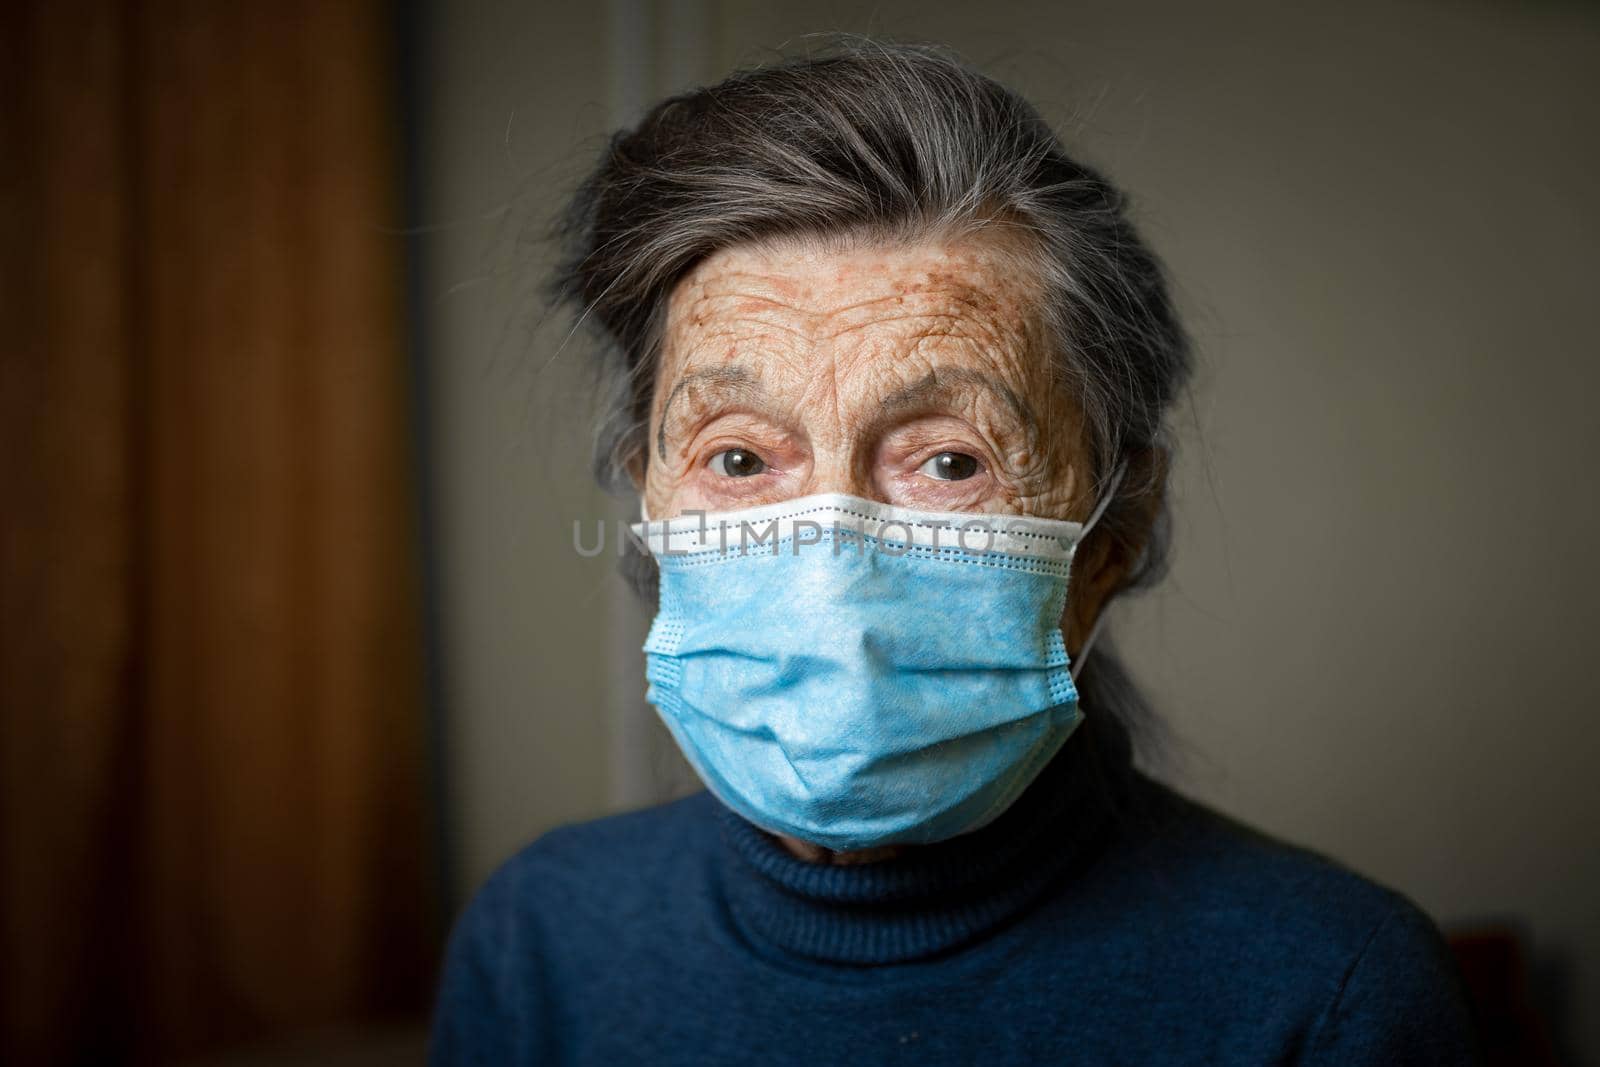 Elderly Caucasian woman with wrinkles on face, gray hair, wearing medical mask, looks attentively at camera, feeling need care and support. Topic safe communication, stay at home during diseases.